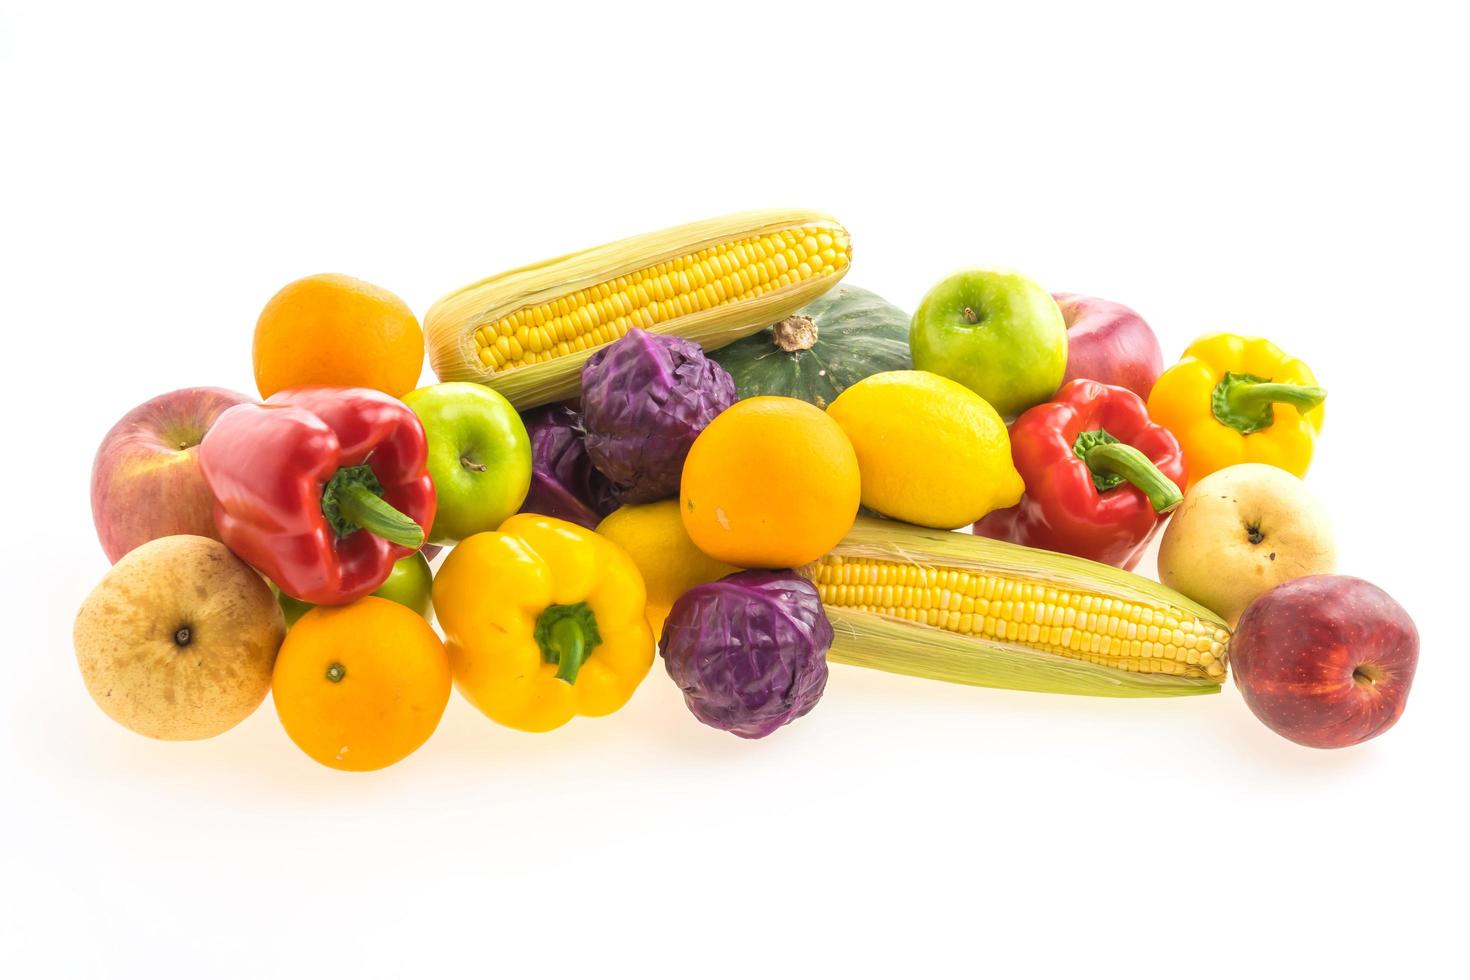 Vegetables and fruits photo